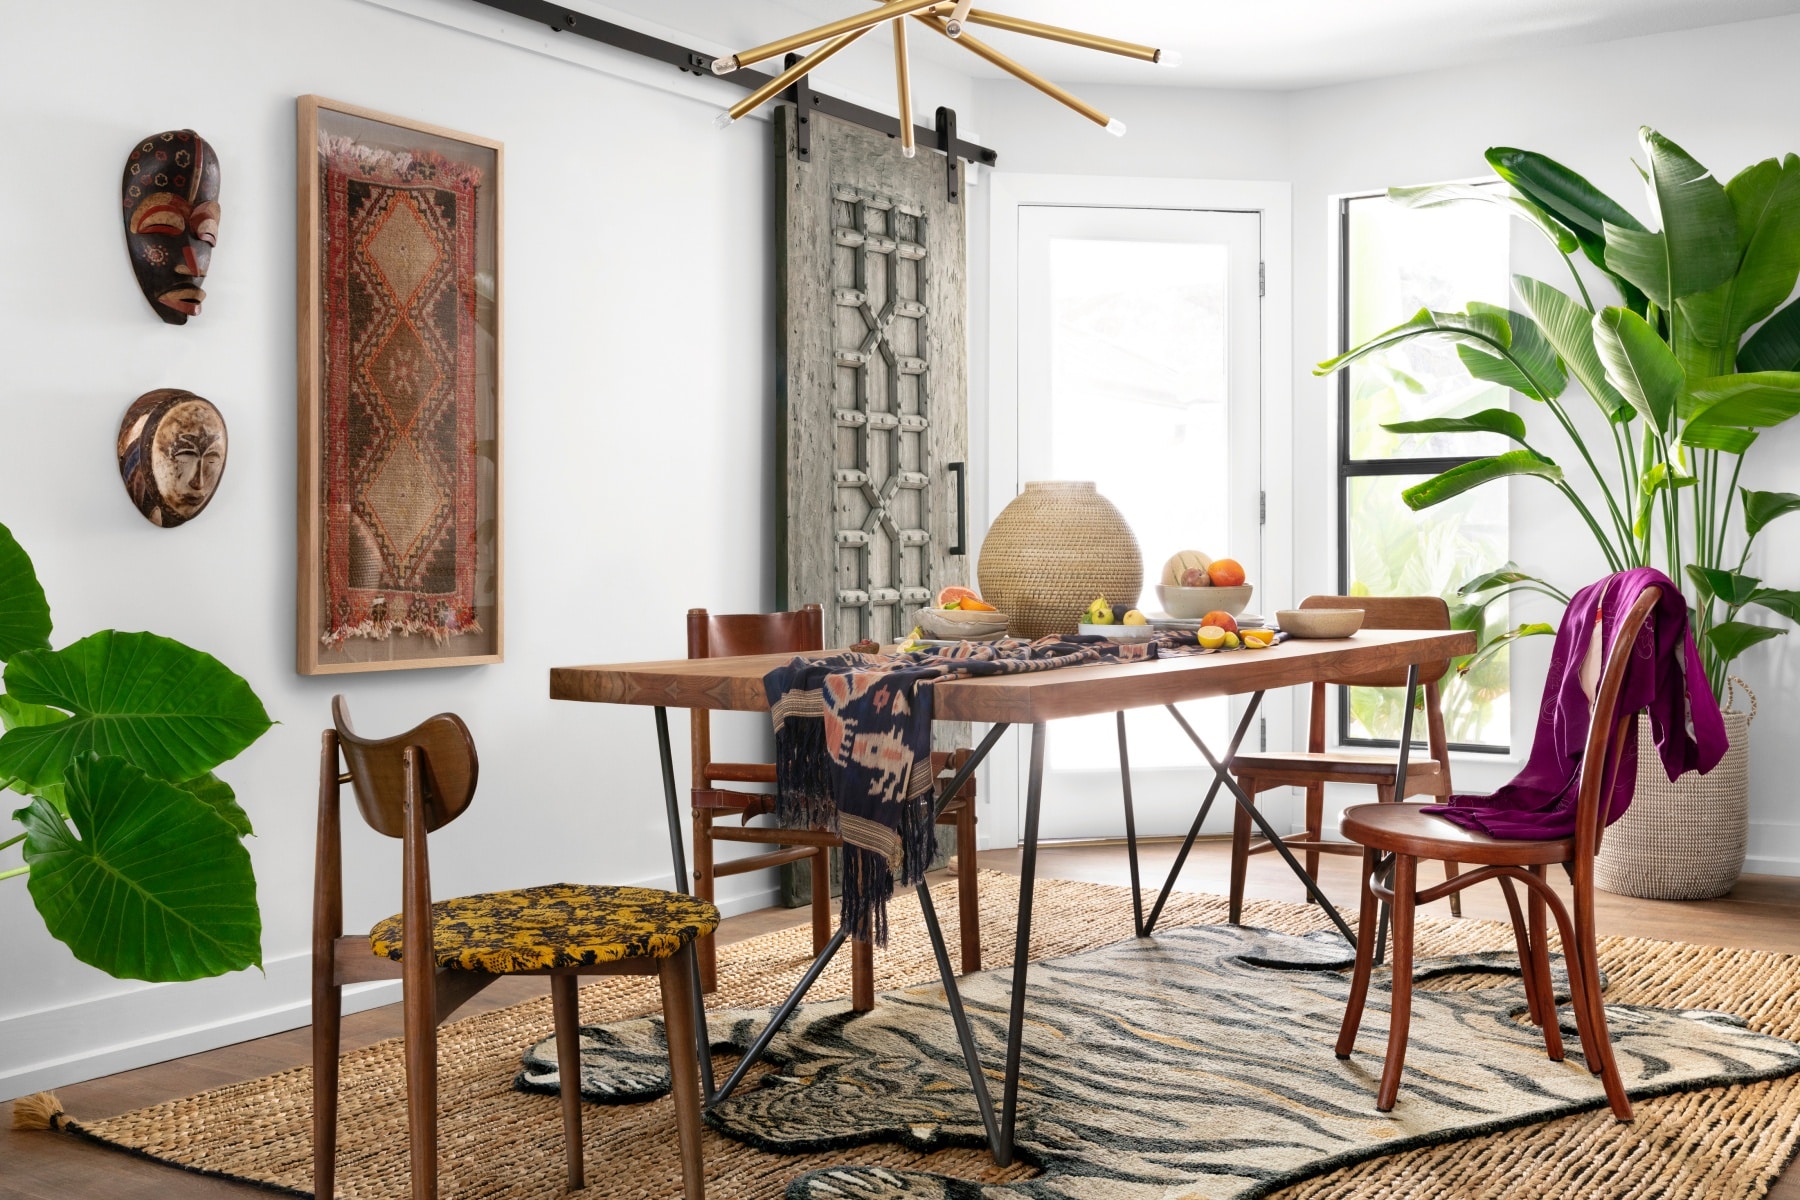 Bohemian Dining Tables Will Spice up Your Next Dinner Party